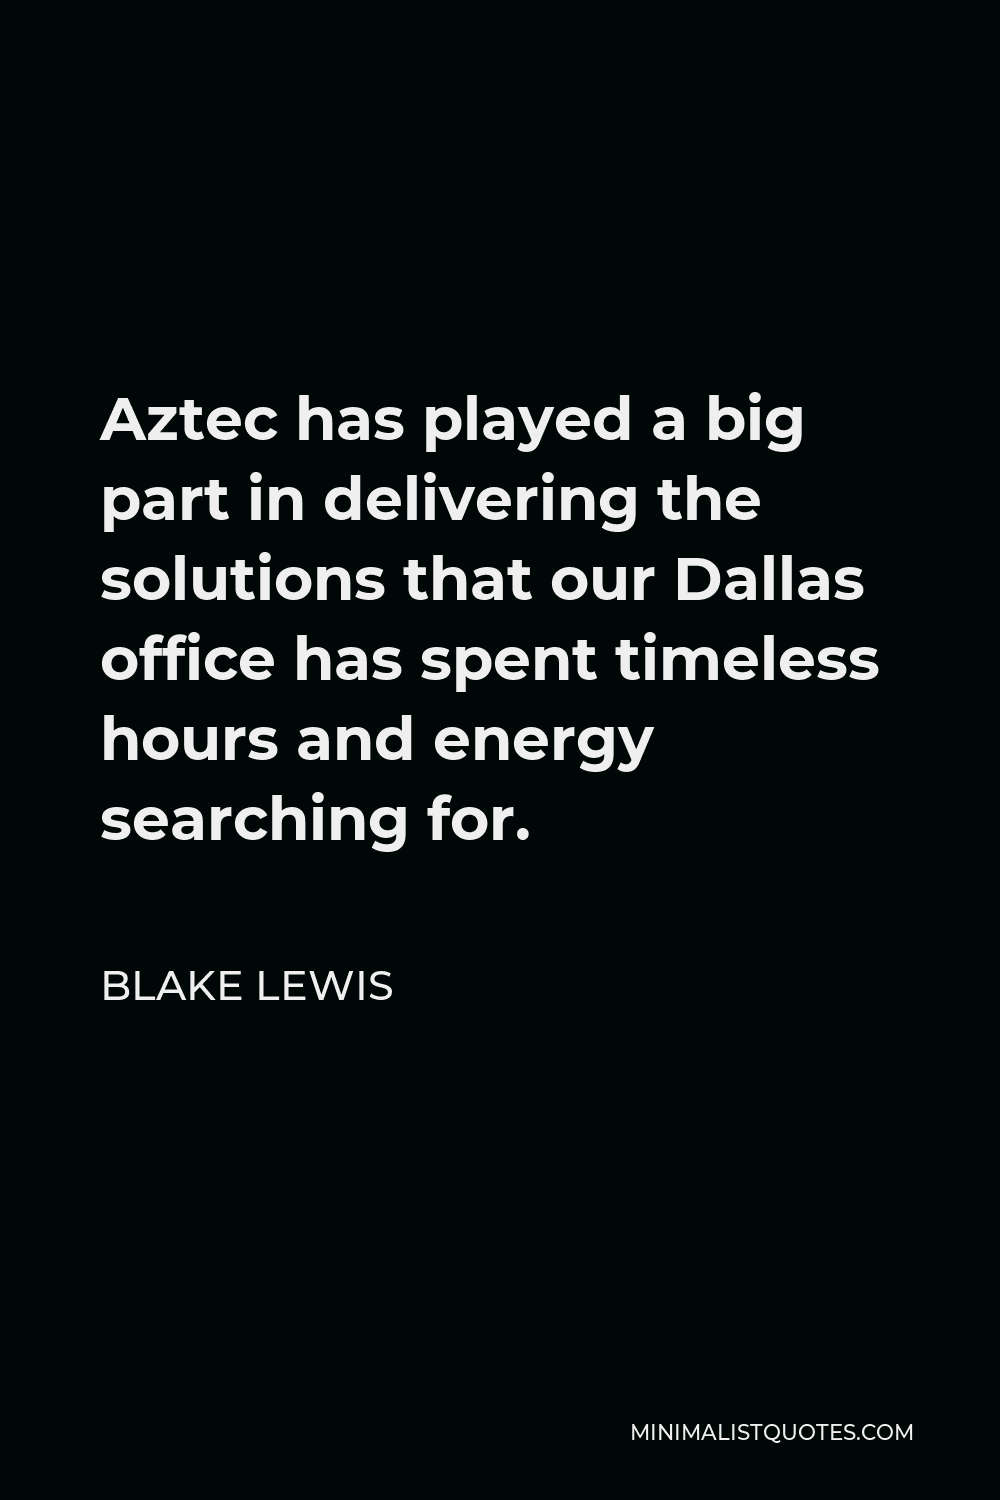 Blake Lewis Quote - Aztec has played a big part in delivering the solutions that our Dallas office has spent timeless hours and energy searching for.